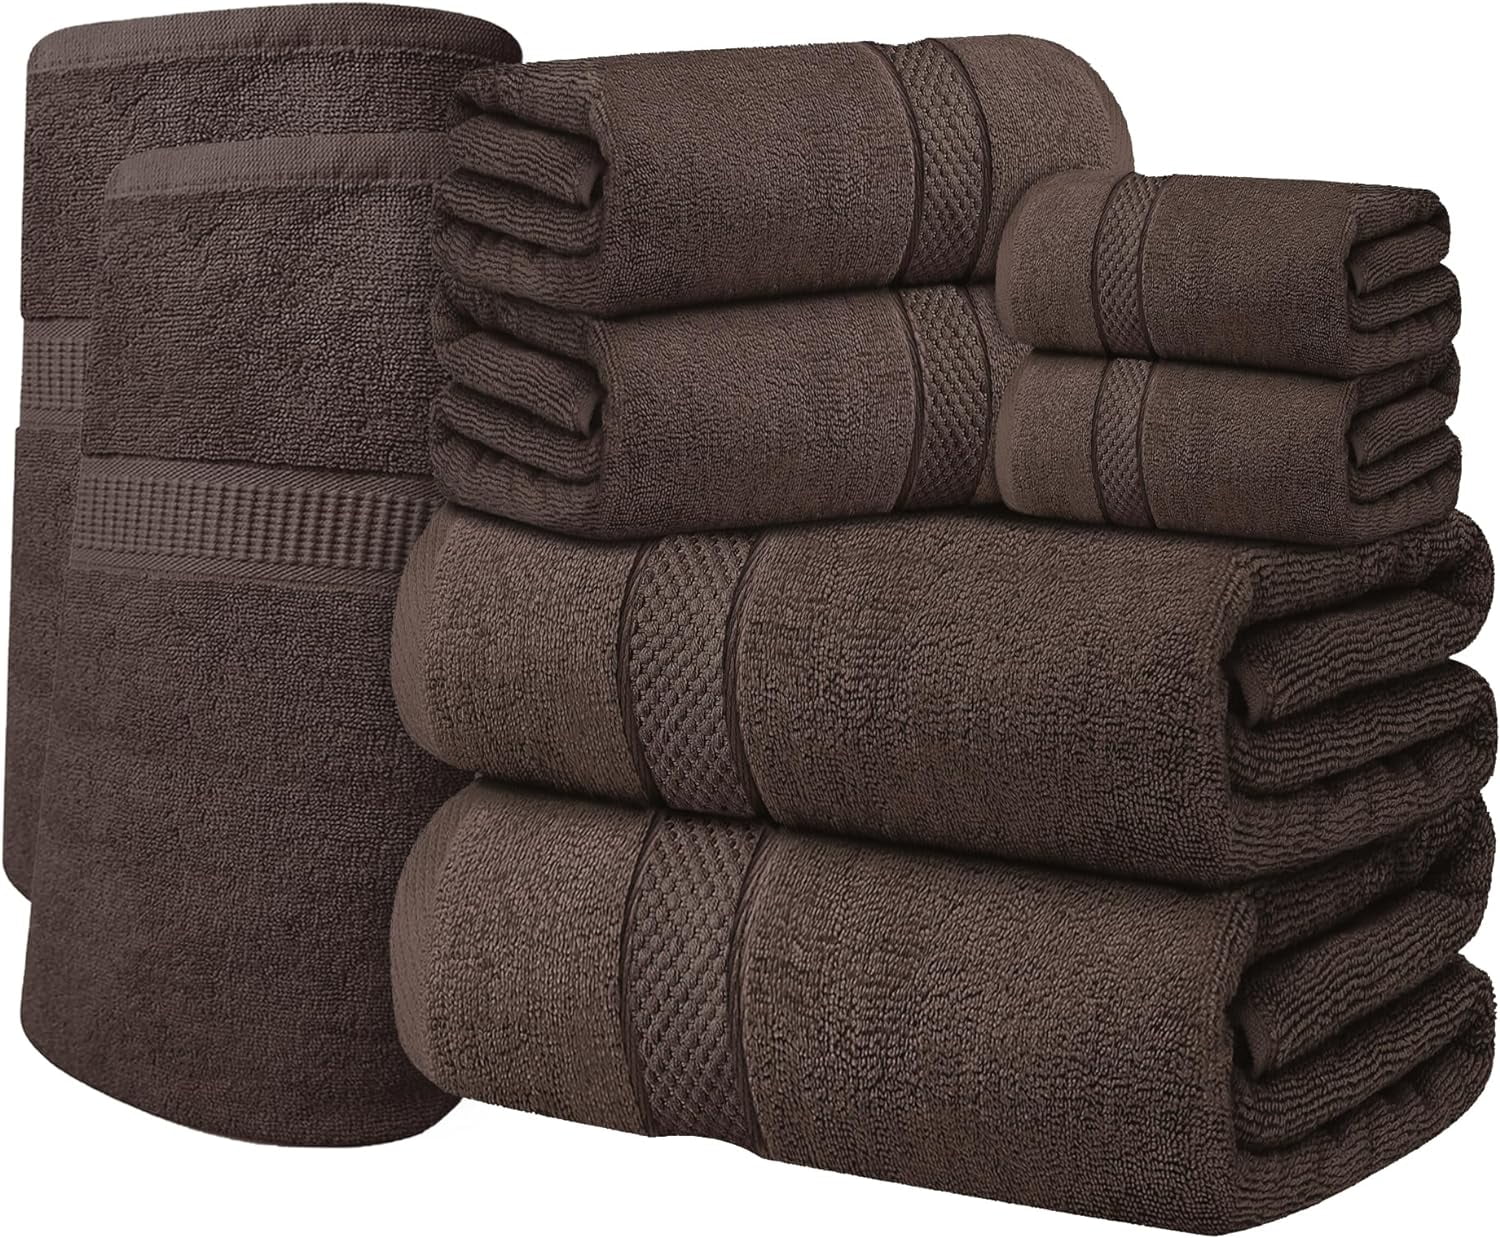 Graccioza Bee Waffle Towels - Silver - Available in 9 Sizes